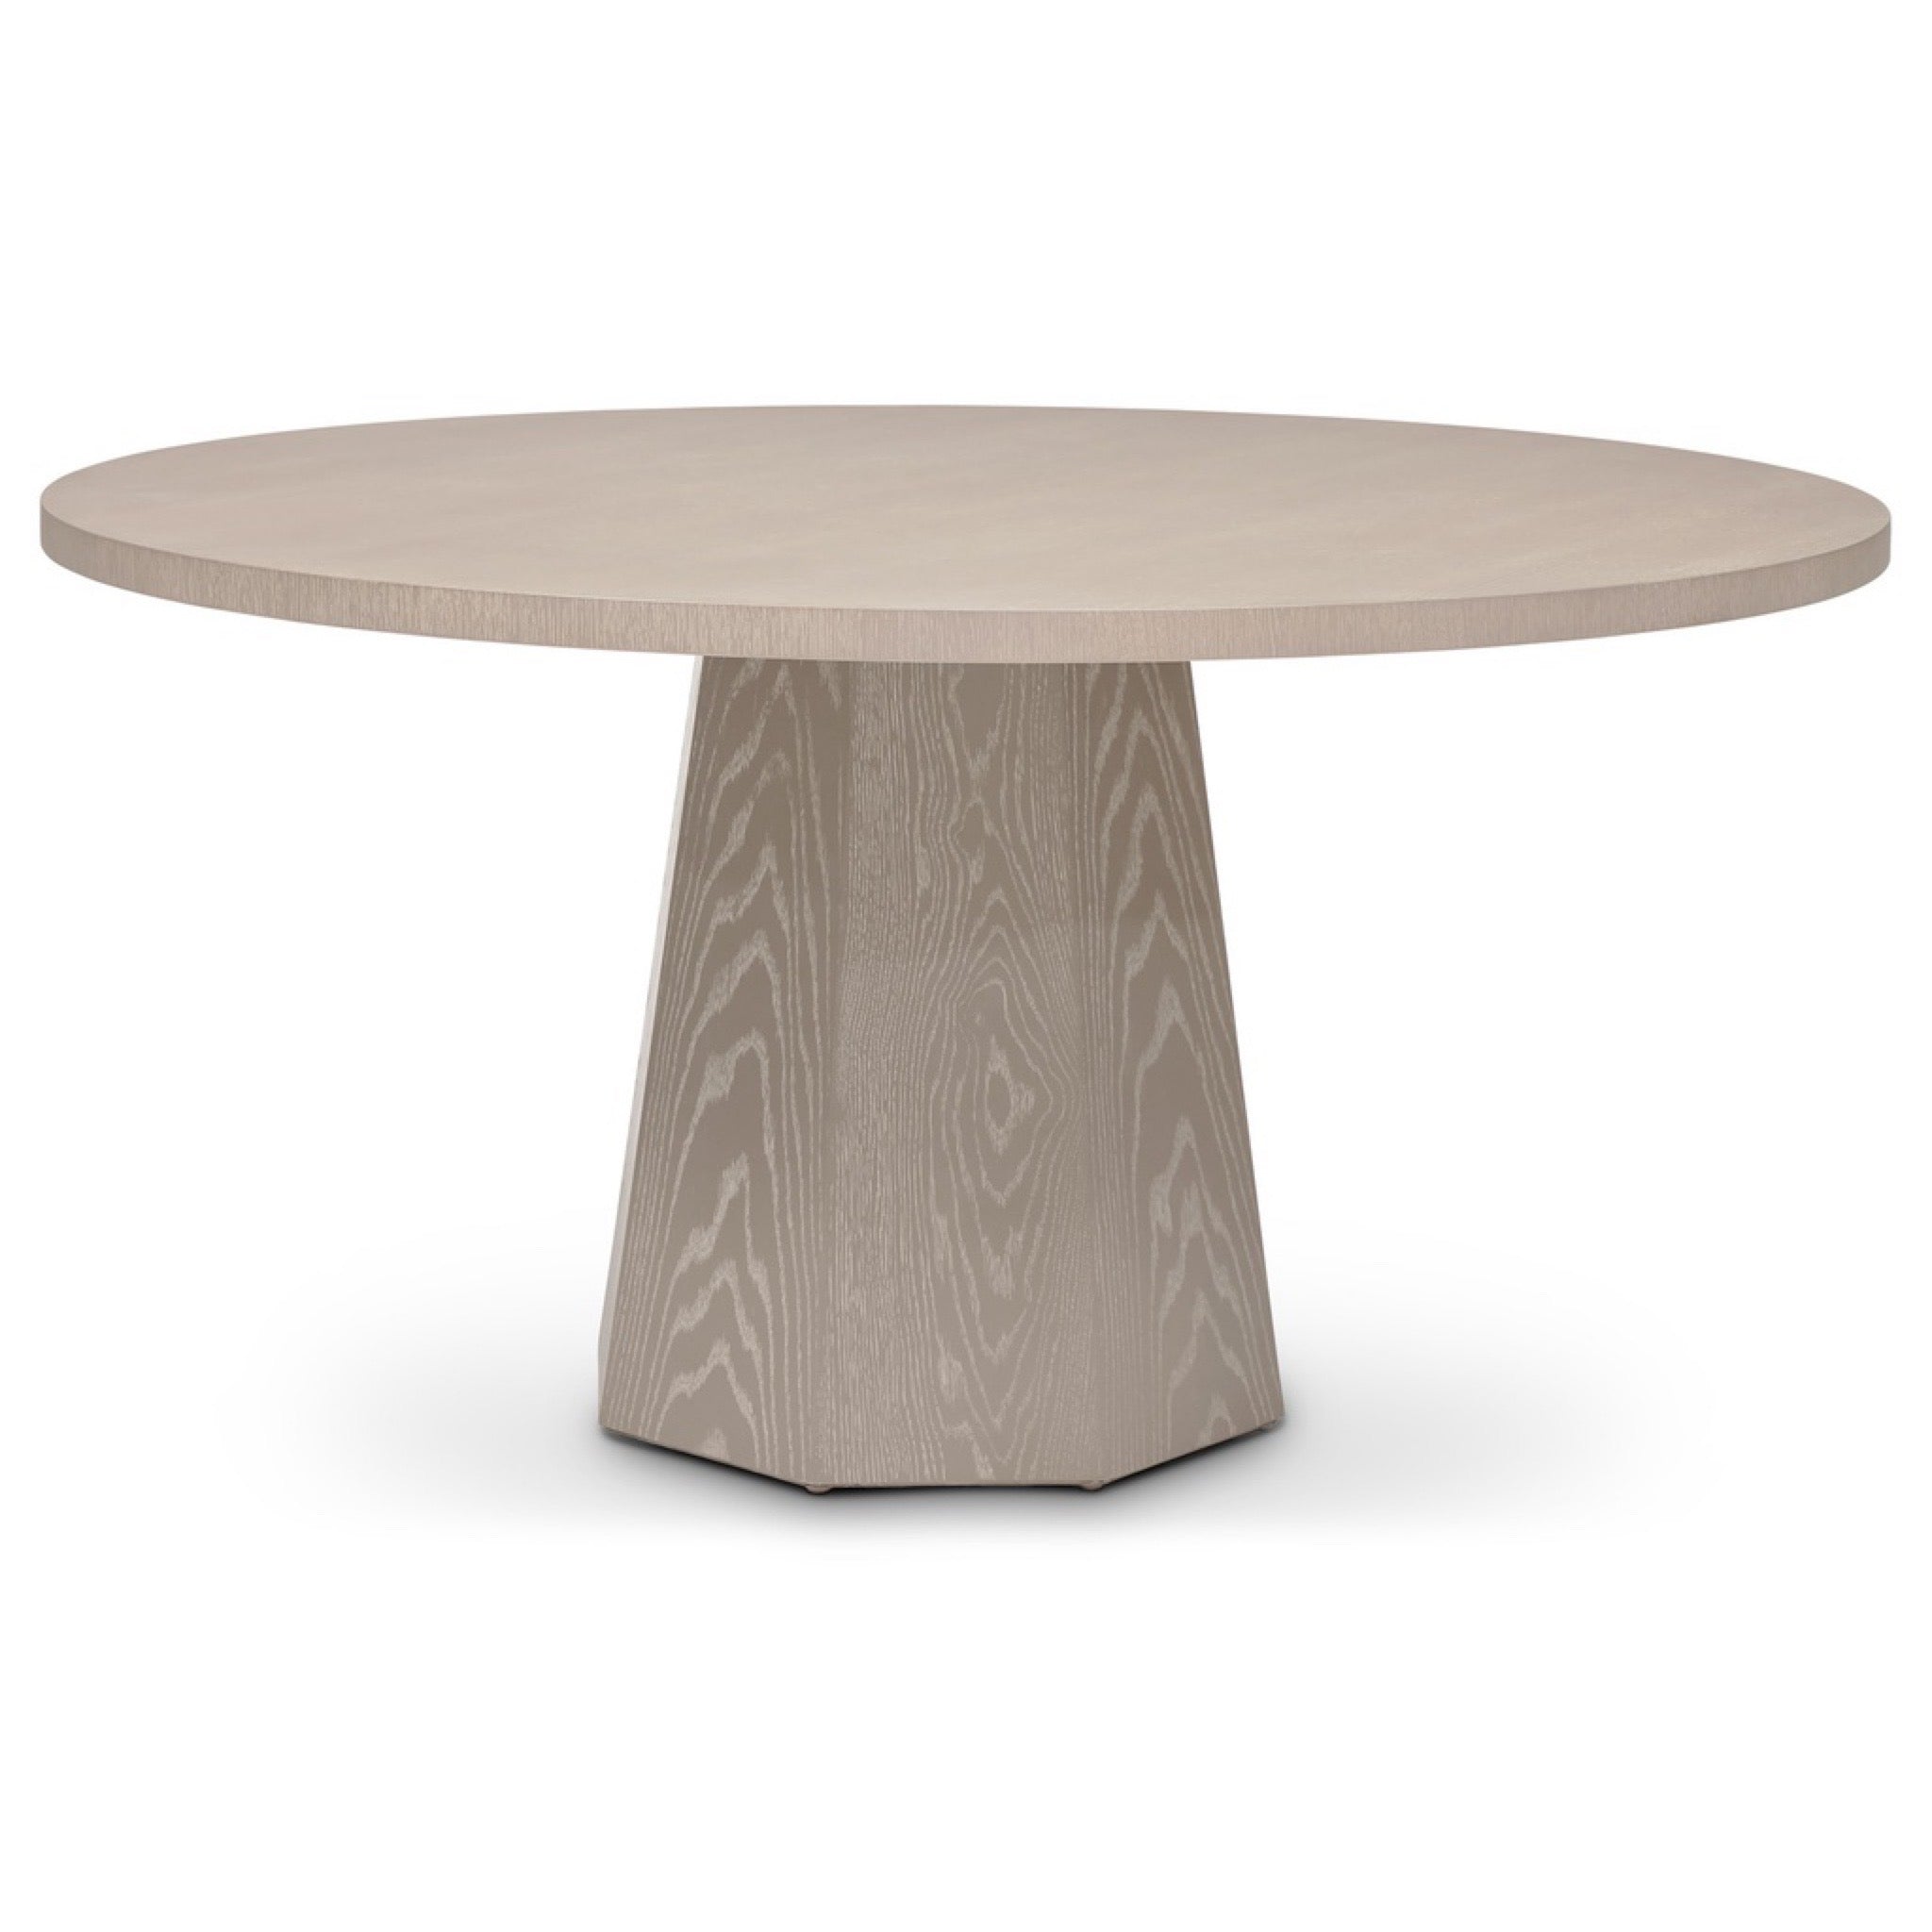 Kaia Round Dining Table - Putty Grey